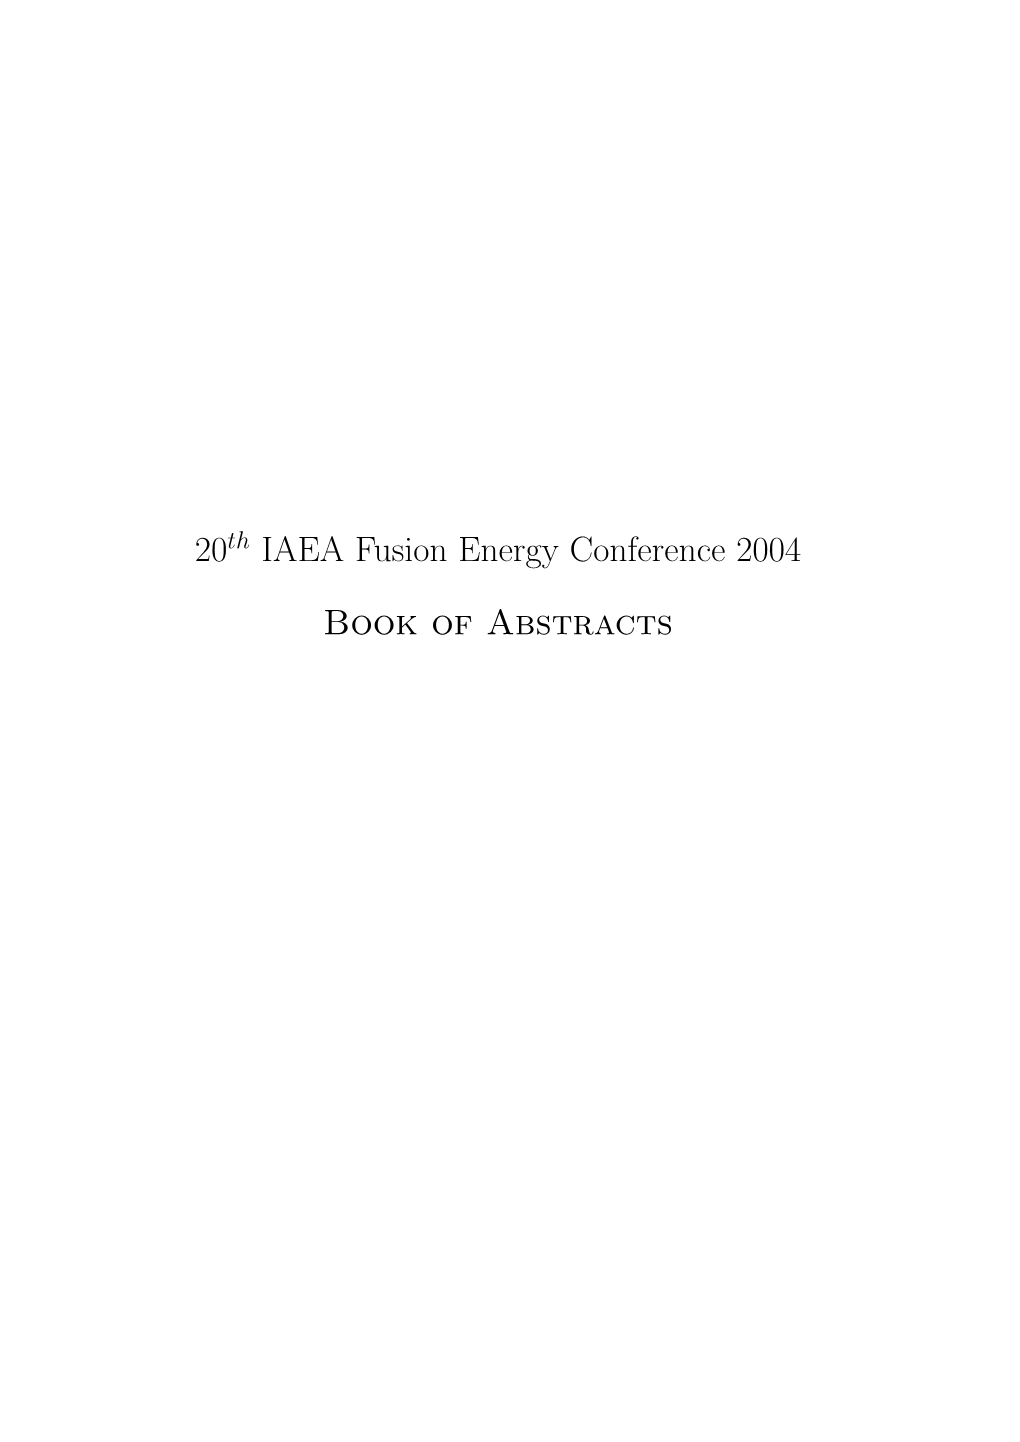 20 IAEA Fusion Energy Conference 2004 Book of Abstracts